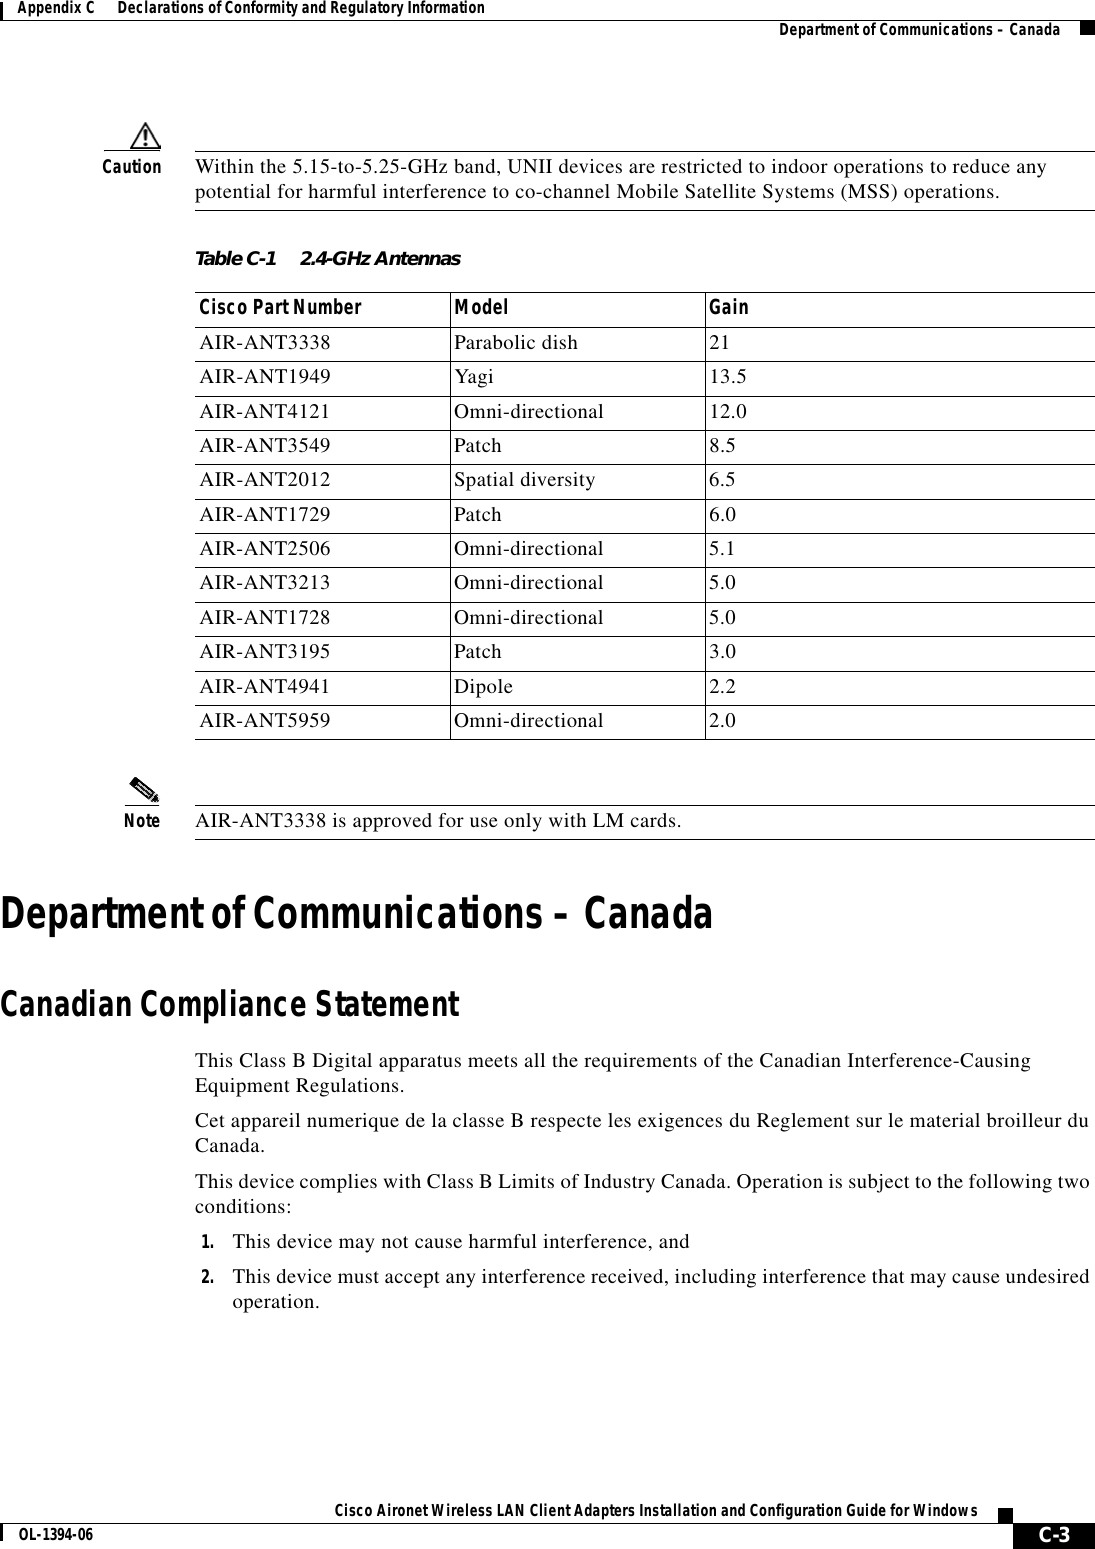 C-3Cisco Aironet Wireless LAN Client Adapters Installation and Configuration Guide for WindowsOL-1394-06Appendix C      Declarations of Conformity and Regulatory Information Department of Communications – CanadaCaution Within the 5.15-to-5.25-GHz band, UNII devices are restricted to indoor operations to reduce any potential for harmful interference to co-channel Mobile Satellite Systems (MSS) operations.Note AIR-ANT3338 is approved for use only with LM cards.Department of Communications – CanadaCanadian Compliance StatementThis Class B Digital apparatus meets all the requirements of the Canadian Interference-Causing Equipment Regulations.Cet appareil numerique de la classe B respecte les exigences du Reglement sur le material broilleur du Canada.This device complies with Class B Limits of Industry Canada. Operation is subject to the following two conditions:1. This device may not cause harmful interference, and2. This device must accept any interference received, including interference that may cause undesired operation.Table C-1 2.4-GHz AntennasCisco Part Number Model GainAIR-ANT3338 Parabolic dish 21AIR-ANT1949 Yagi 13.5AIR-ANT4121 Omni-directional 12.0AIR-ANT3549 Patch 8.5AIR-ANT2012 Spatial diversity 6.5AIR-ANT1729 Patch 6.0AIR-ANT2506 Omni-directional 5.1AIR-ANT3213 Omni-directional 5.0AIR-ANT1728 Omni-directional 5.0AIR-ANT3195 Patch 3.0AIR-ANT4941 Dipole 2.2AIR-ANT5959 Omni-directional 2.0